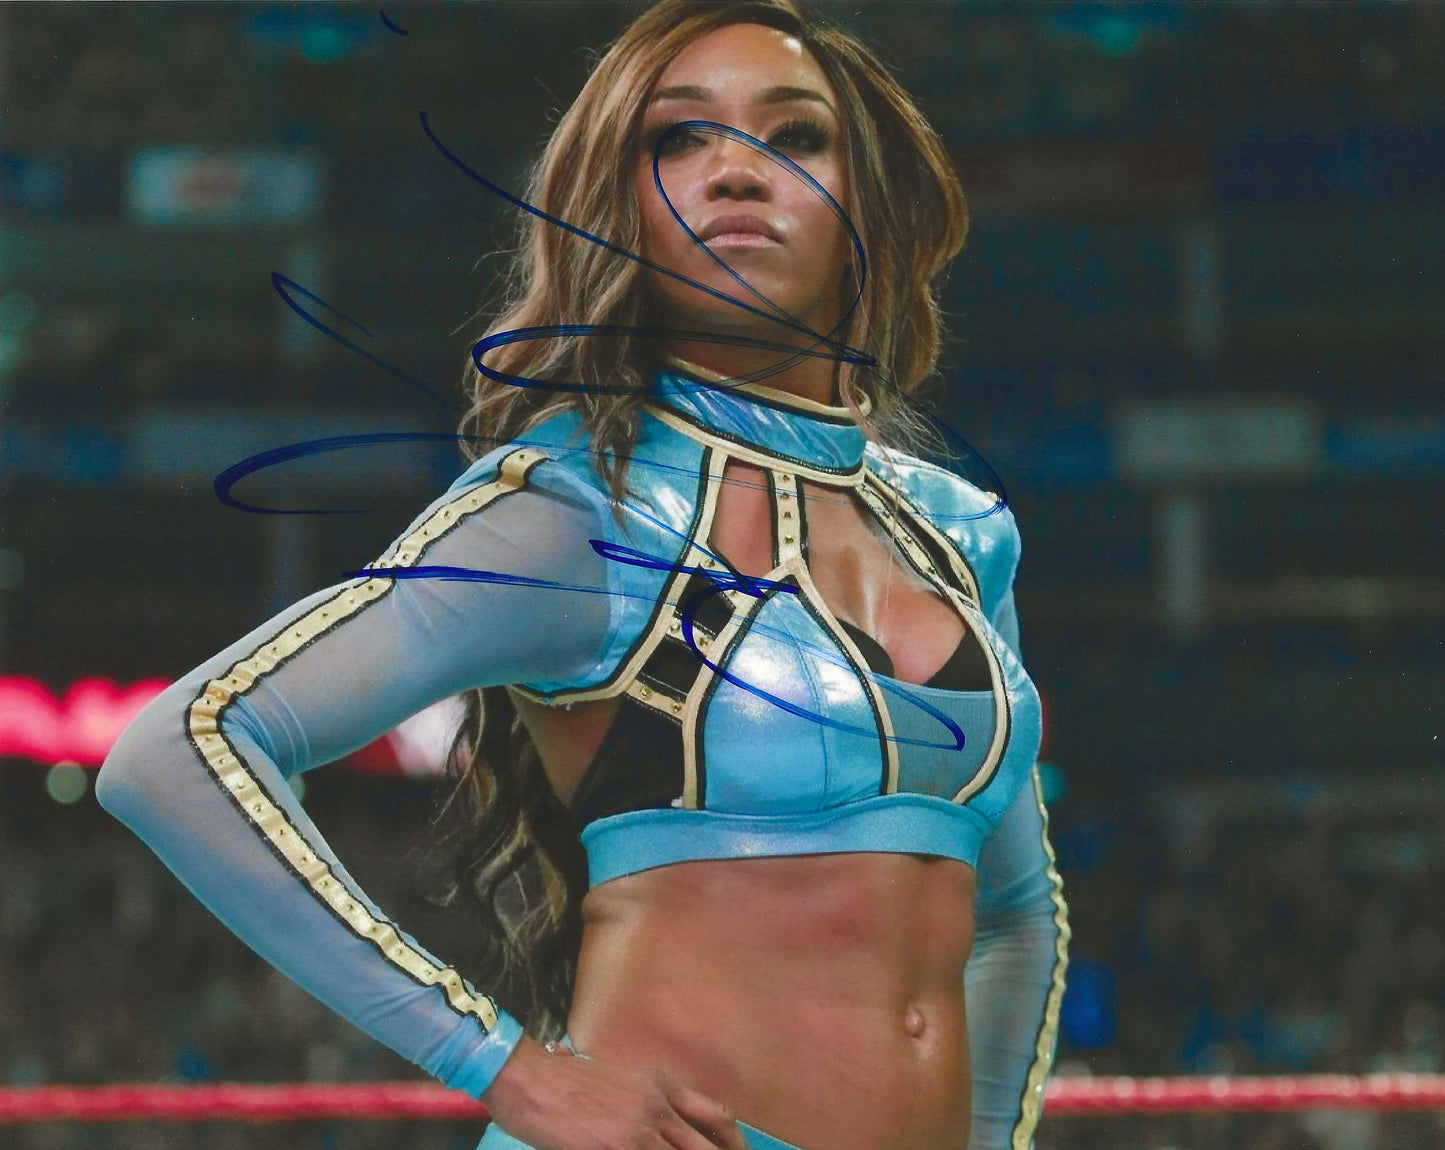 Alicia fox Autographed Signed "WWE" 8X10 Photo Elite Promotions & Graphz Authentication